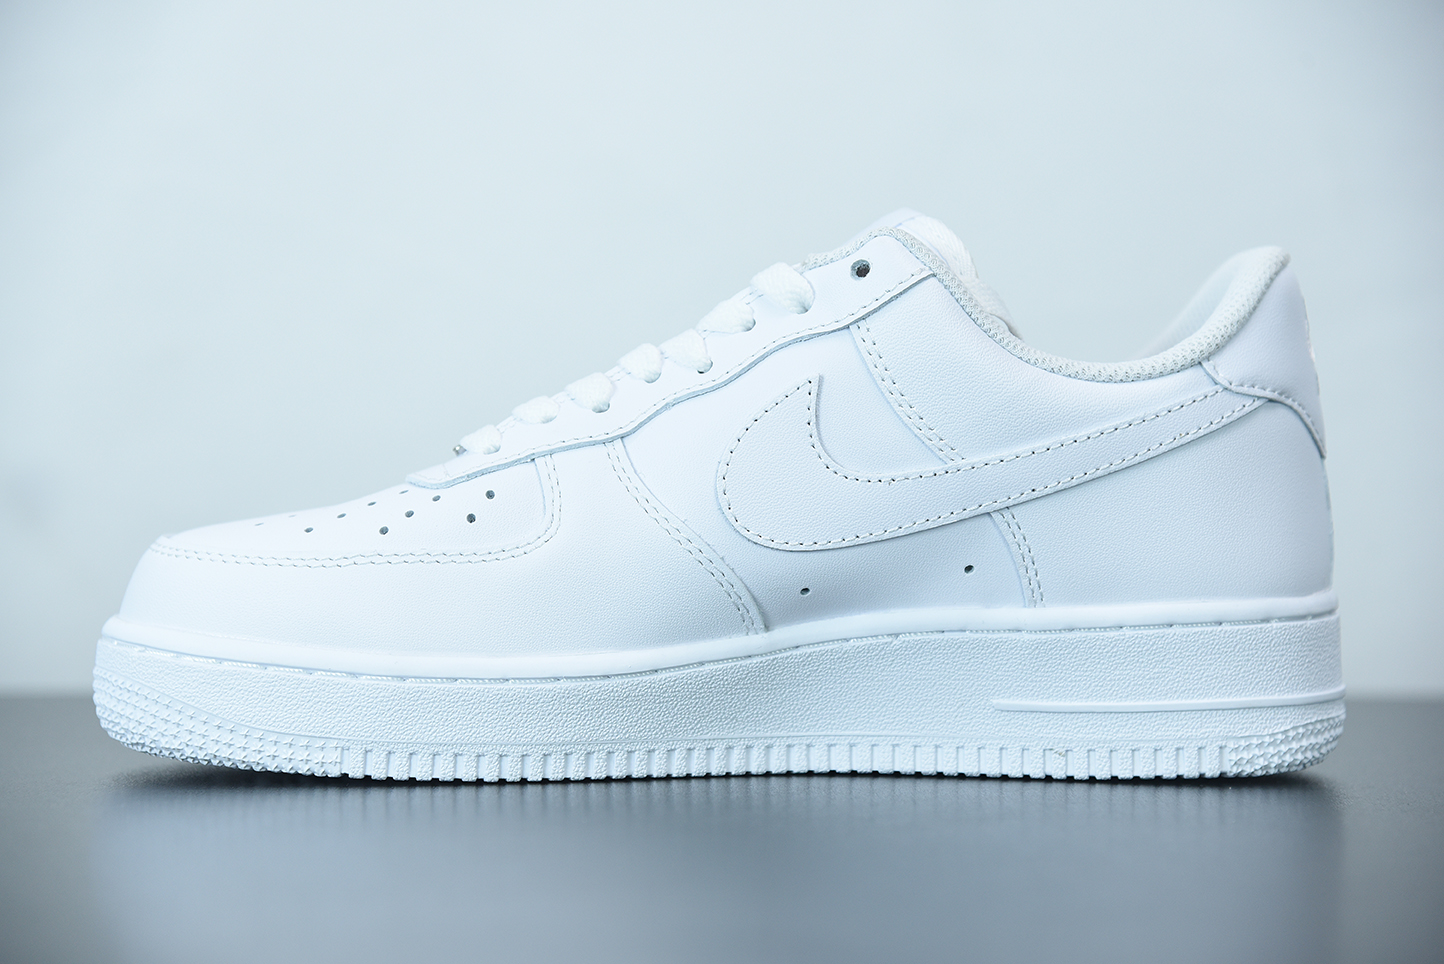 Artista Panda Acurrucarse Nike Air Force 1 Low 07 “White on White” 315122 - nike black patent air max  1s price in nepal - 111 – Tra-incShops